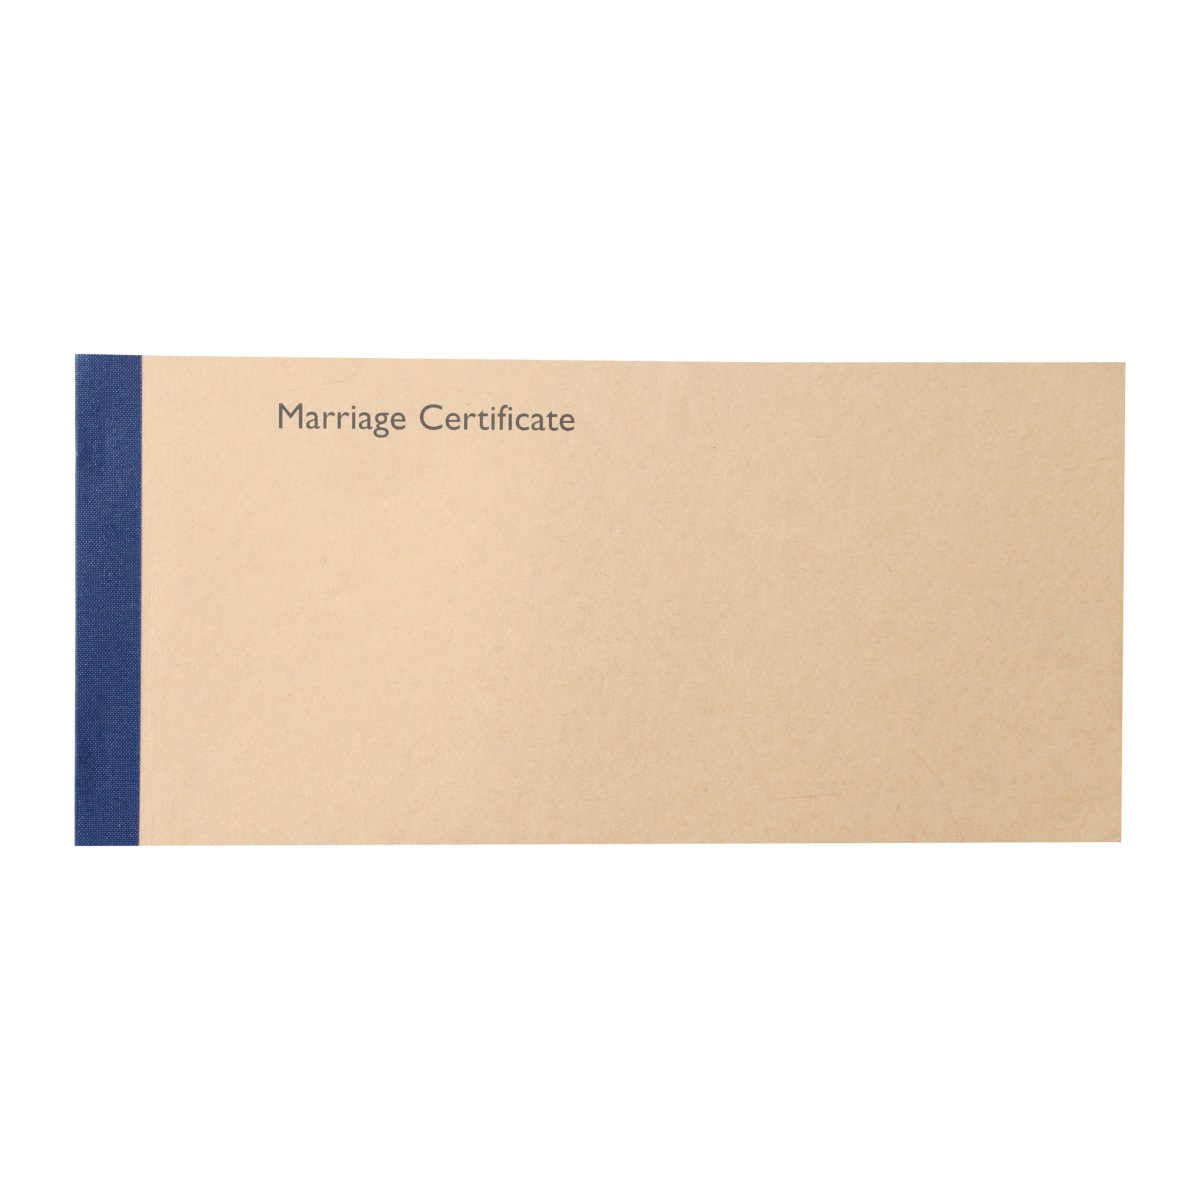 Marriage Certificates for Church Records - Hayes & Finch